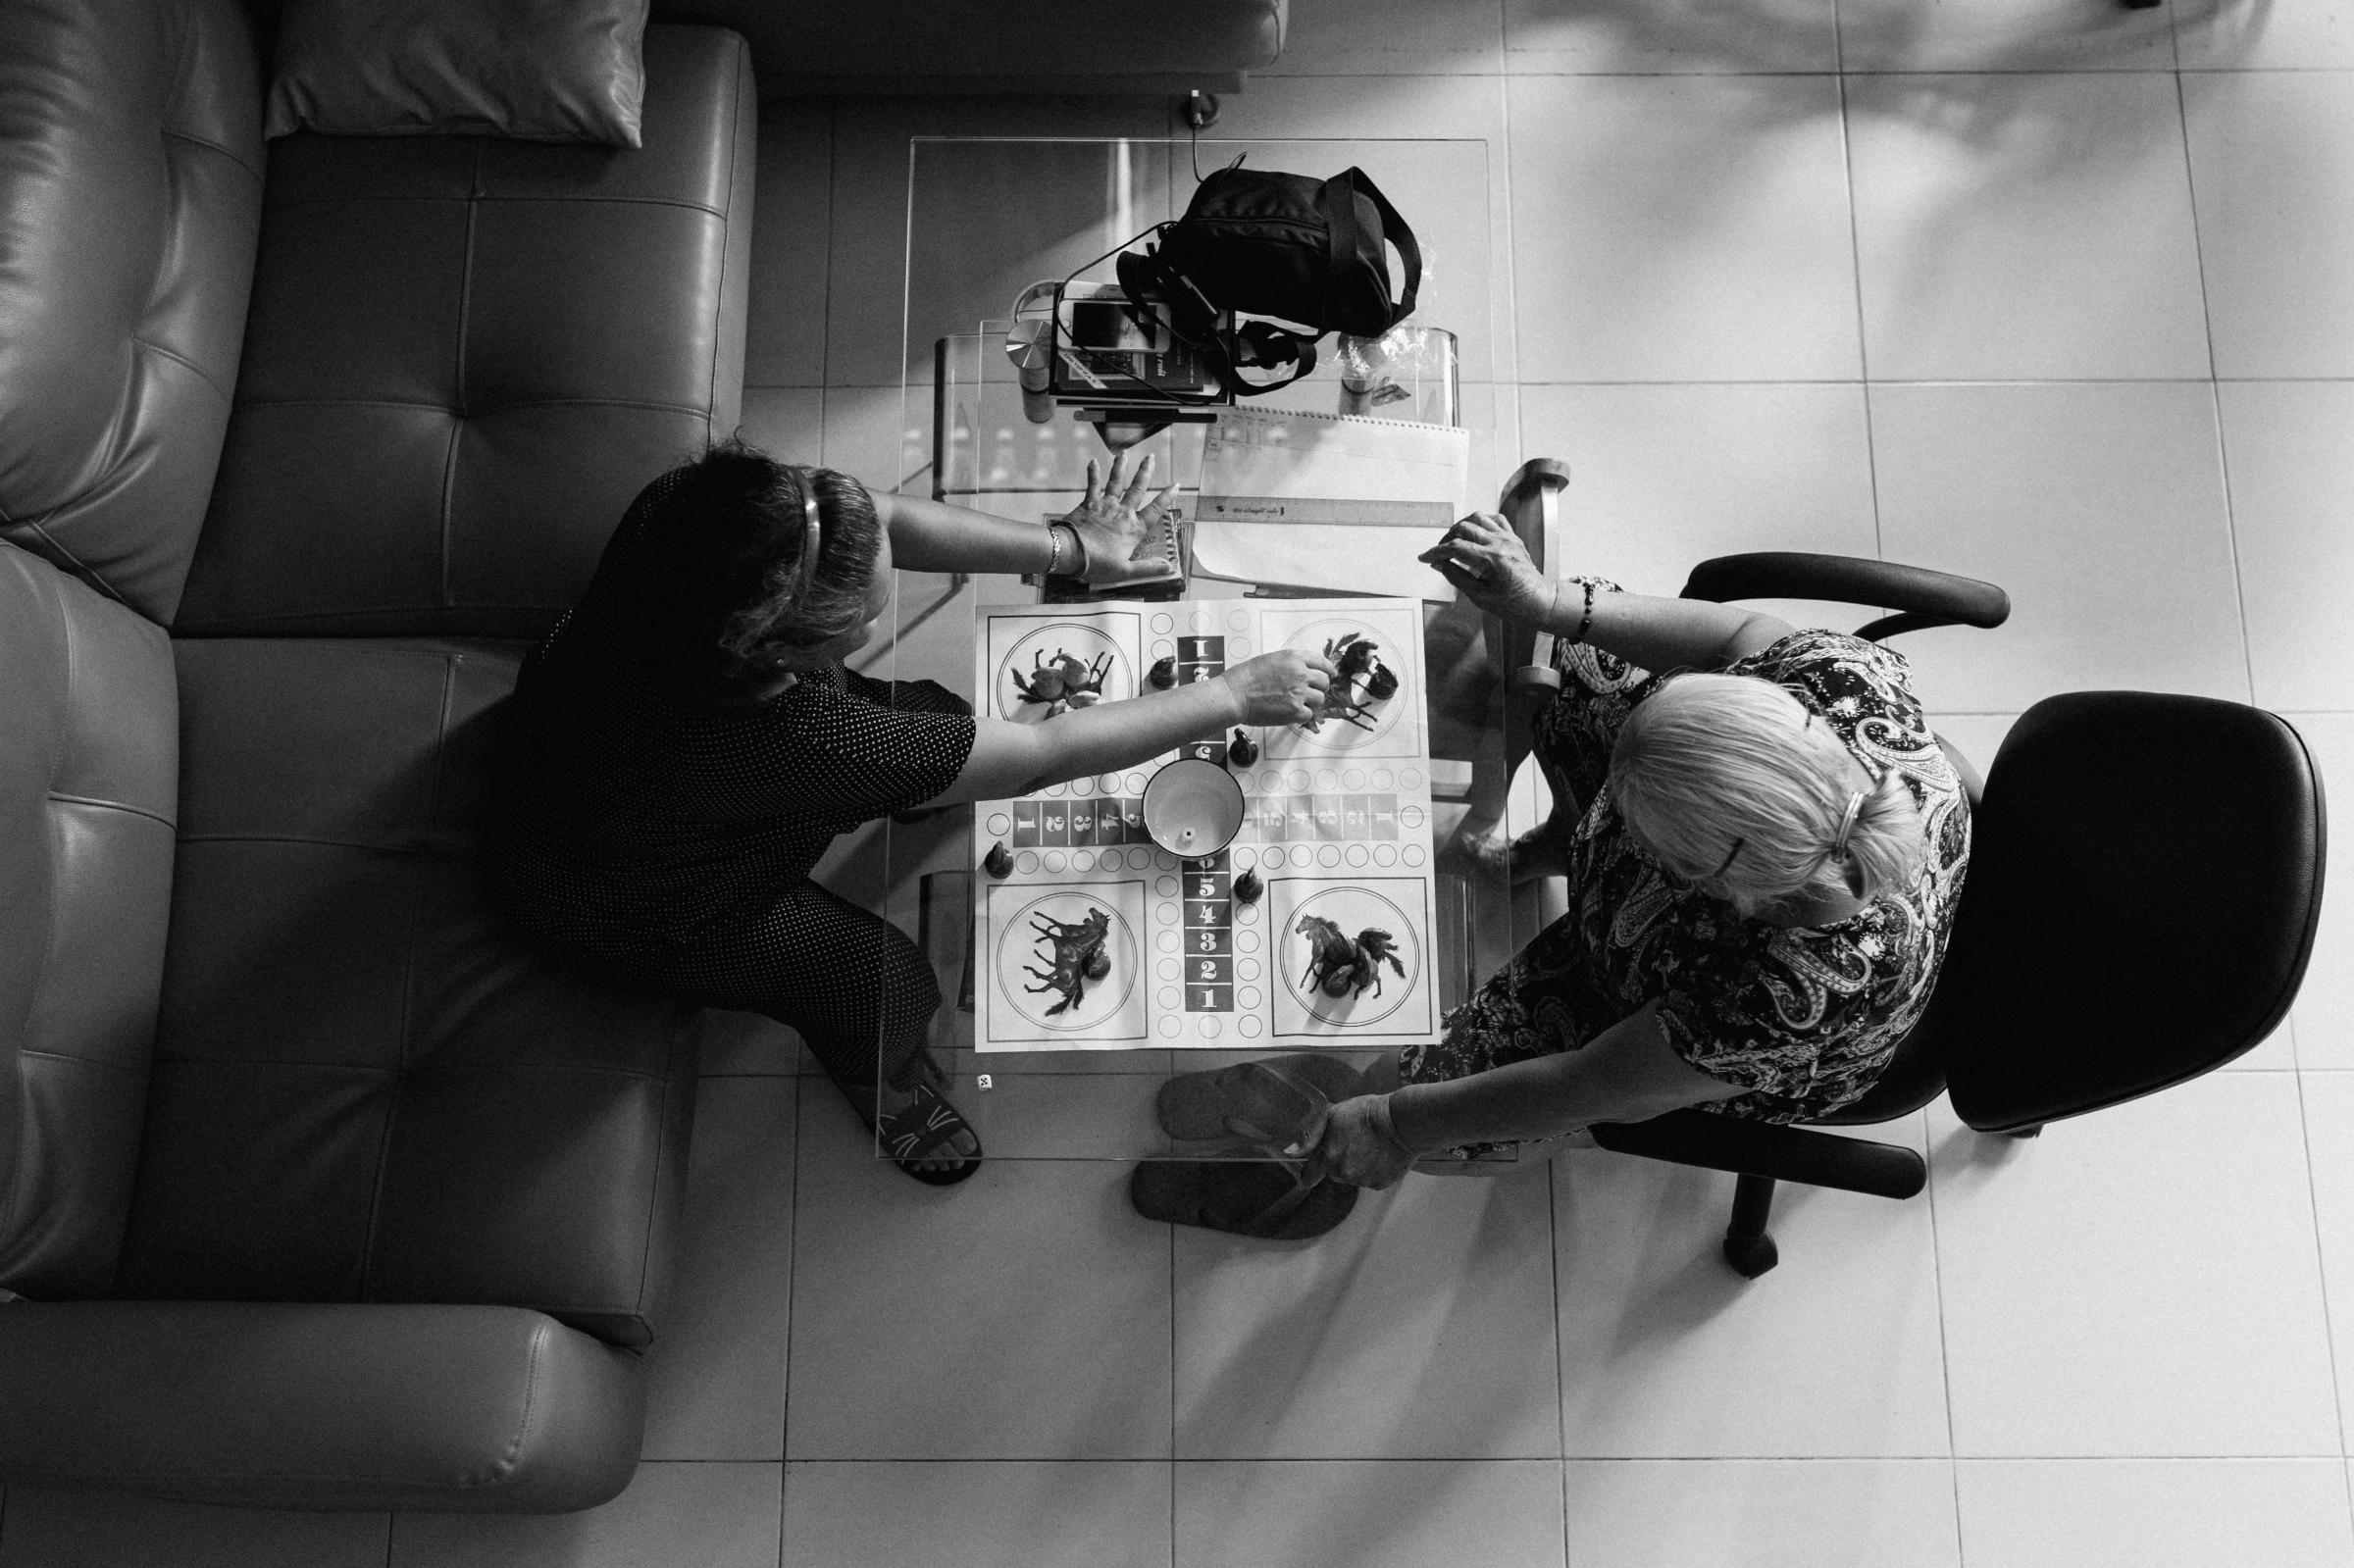 "Mom, don't be scared" - A story of my Mother fighting against depression during Covid lockdown in Vietnam - PLAYING A CHESS GAME.  Similarly, playing games with...